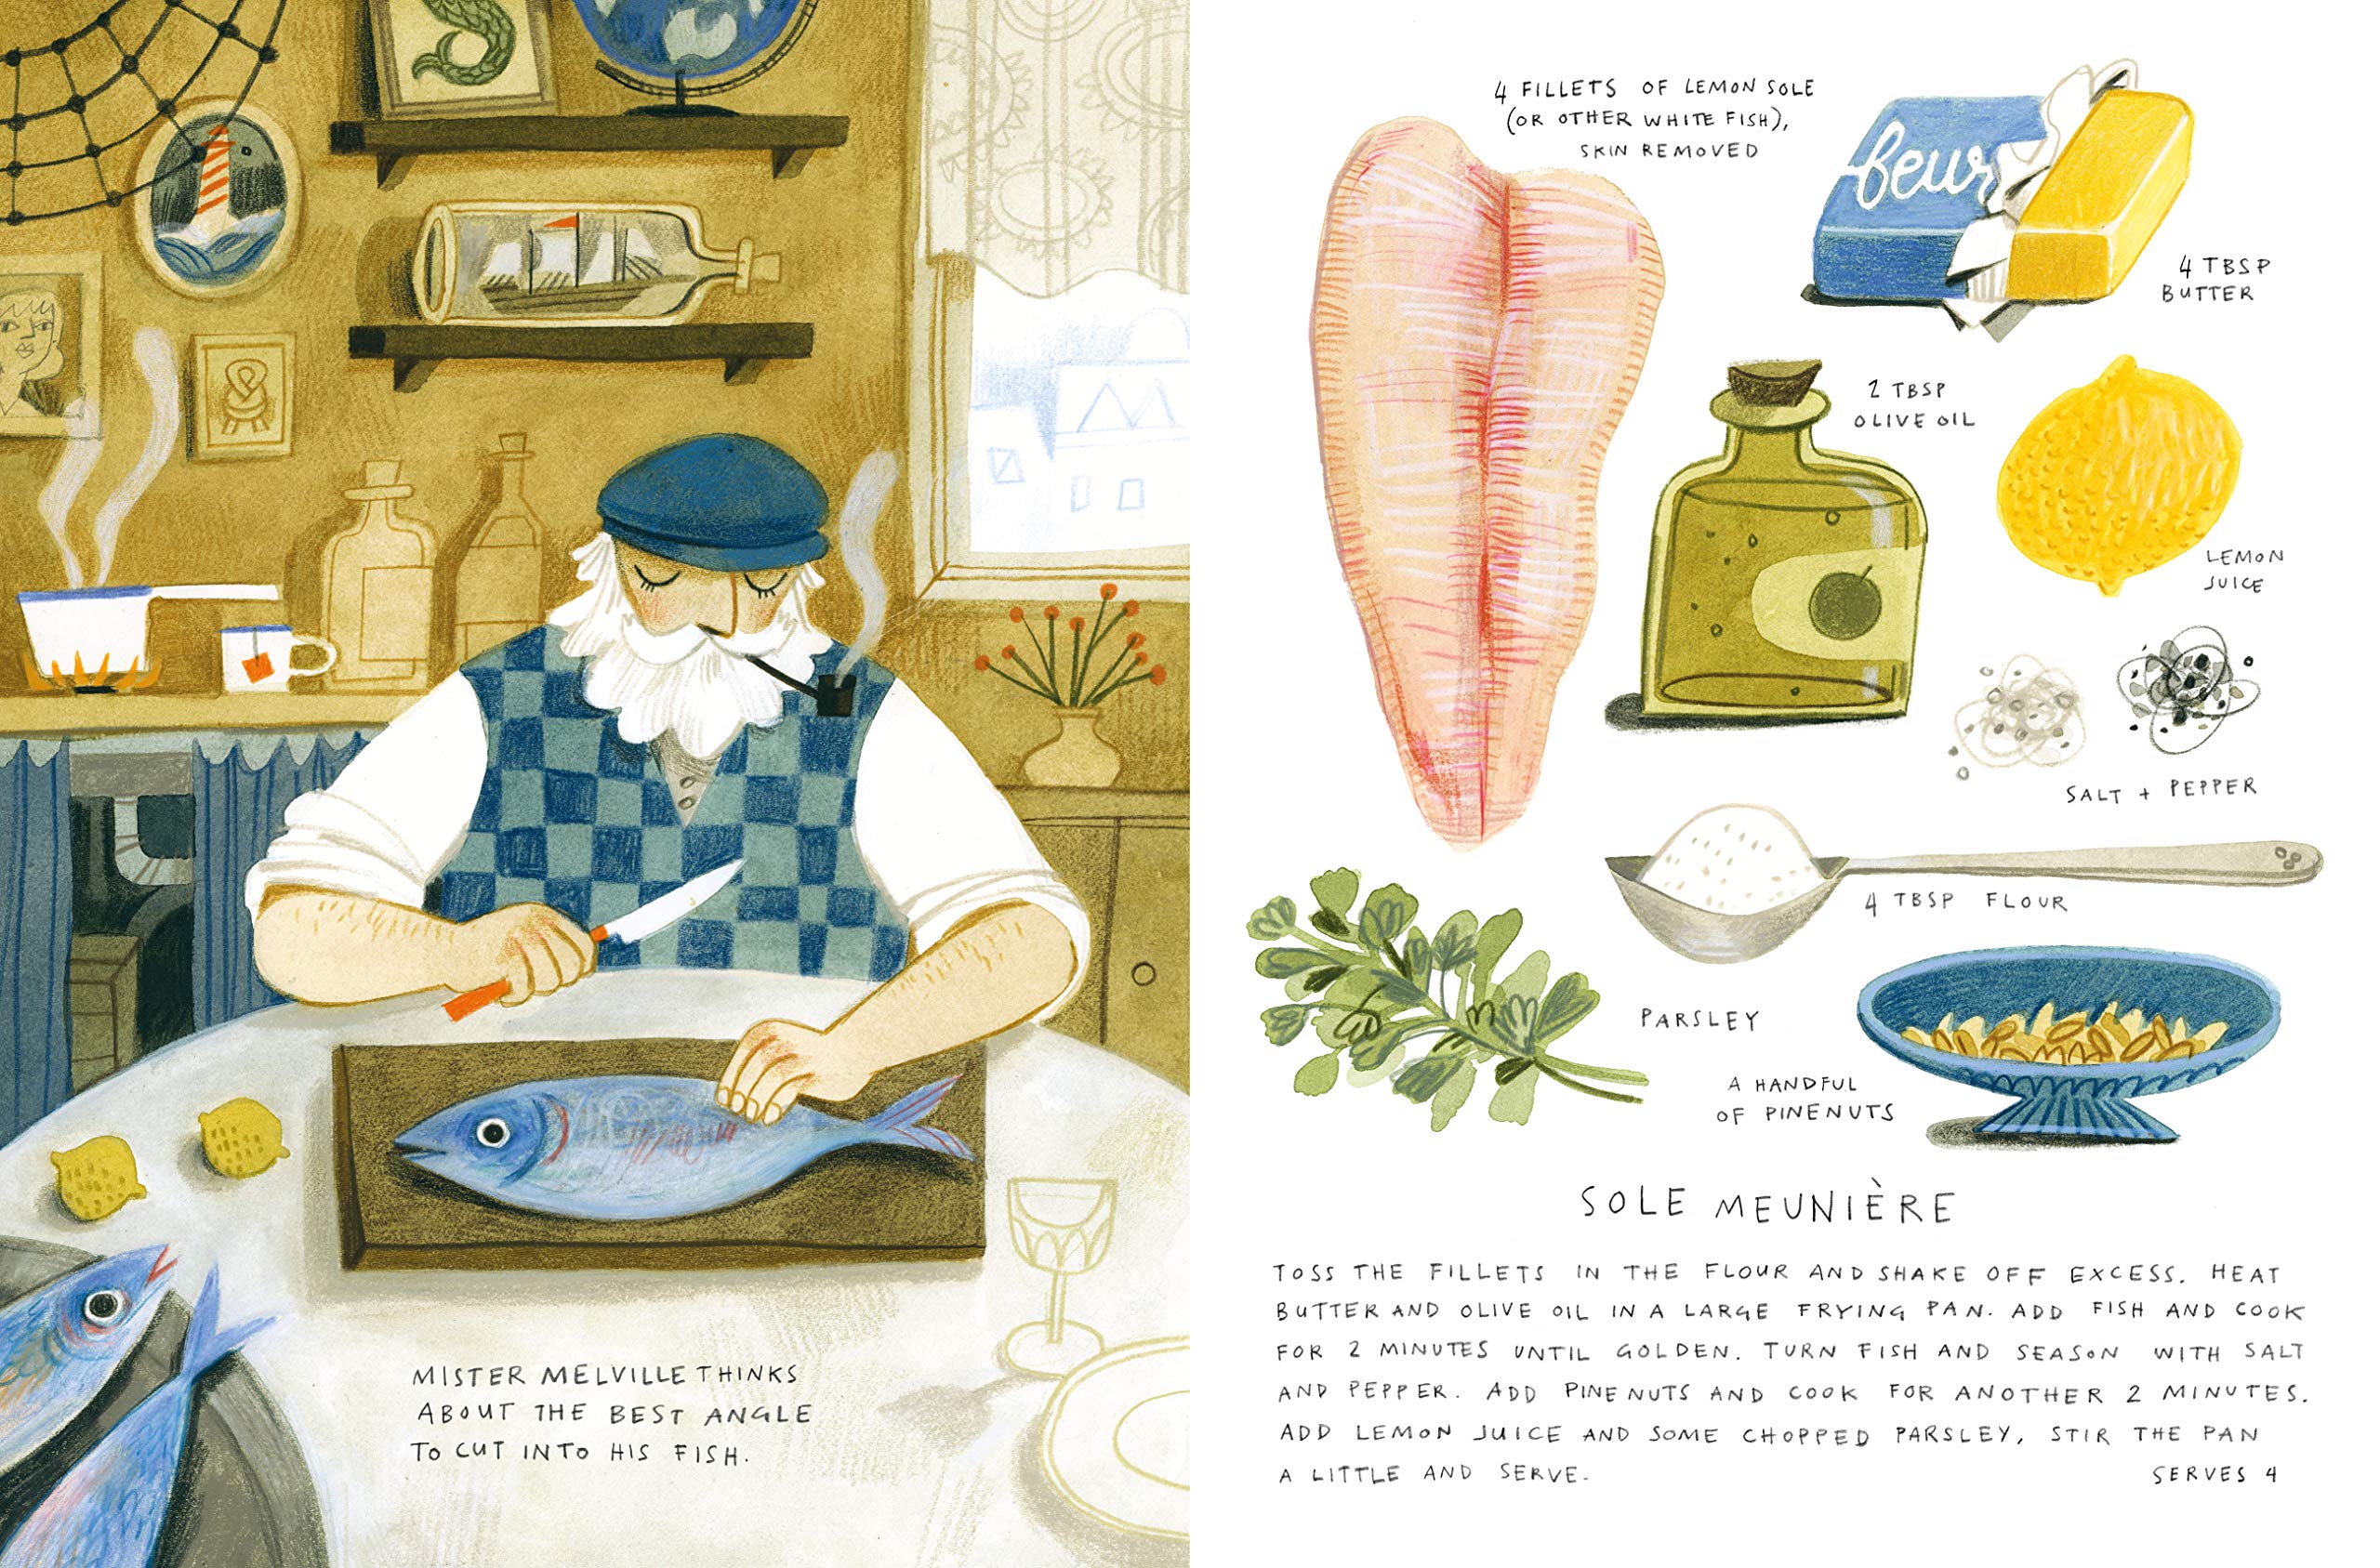 What’s Cooking at 10 Garden Street?: Recipes for Kids From Around the World (Felicita Sala)